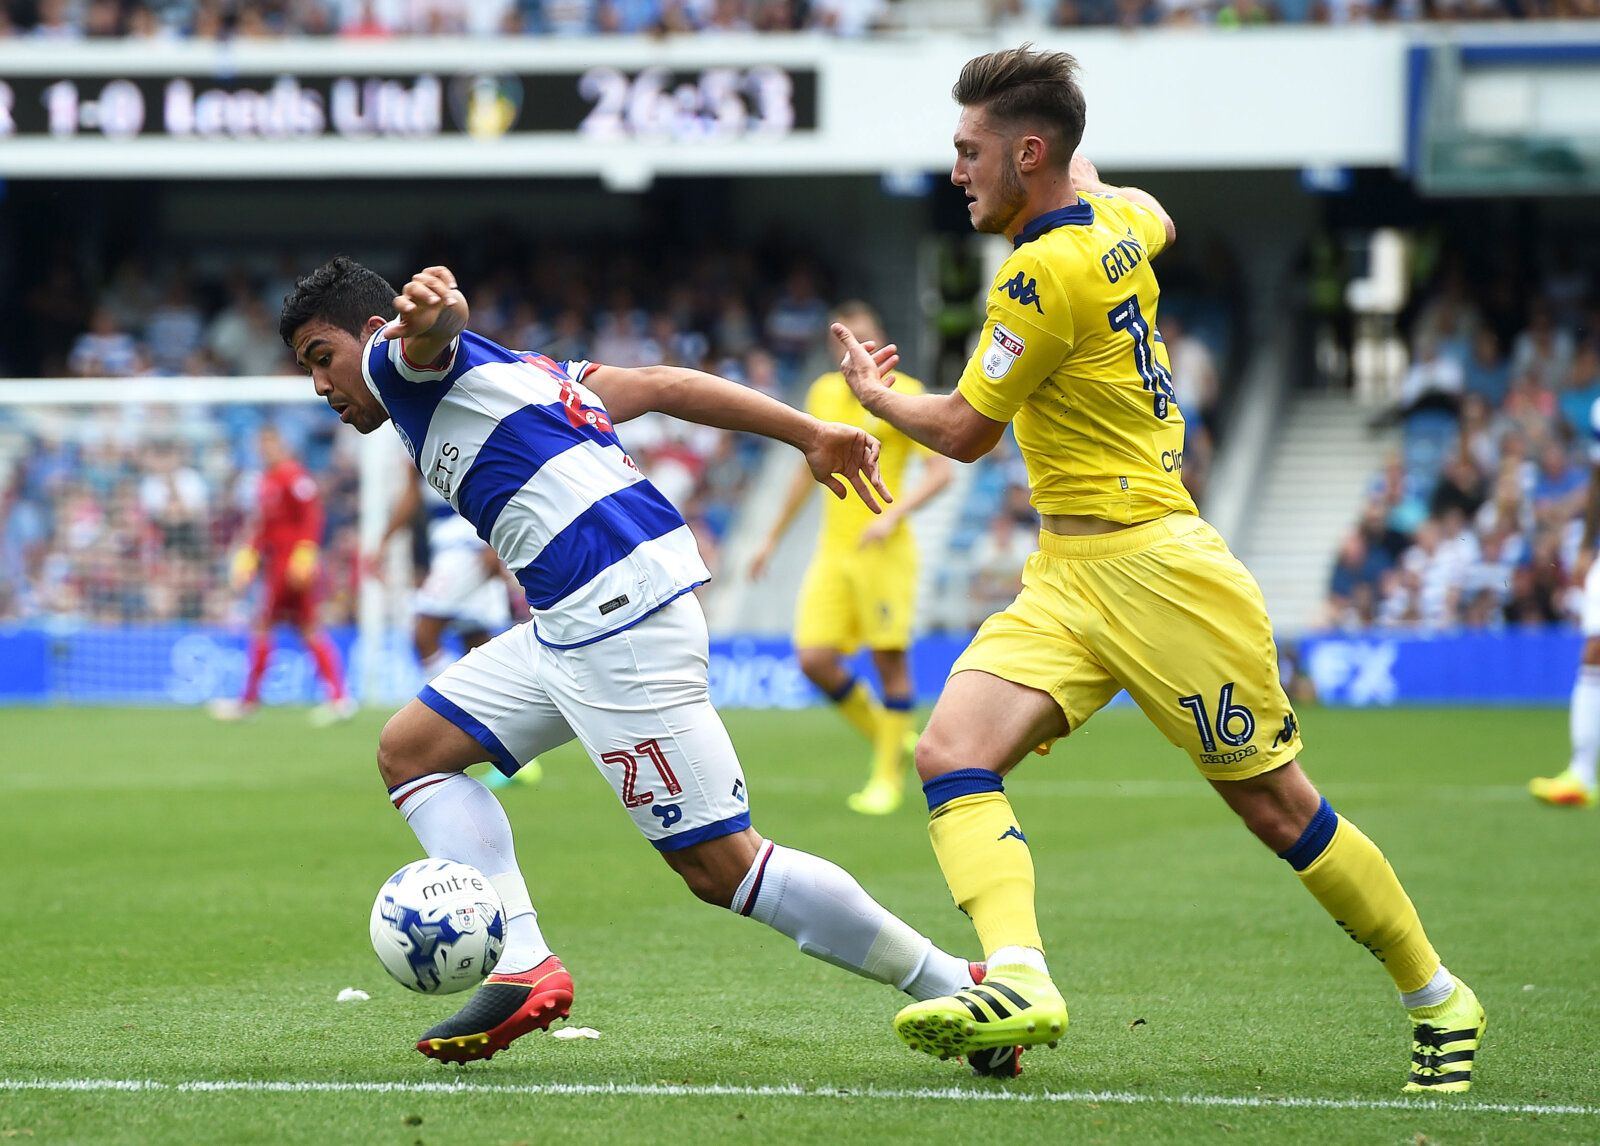 Football Soccer Britain - Queens Park Rangers v Leeds United - Sky Bet Championship - Loftus Road - 7/8/16 
QPR's Massimo Luongo in action with Leeds United's Matt Grimes  
Mandatory Credit: Action Images / Alan Walter 
Livepic 
EDITORIAL USE ONLY.